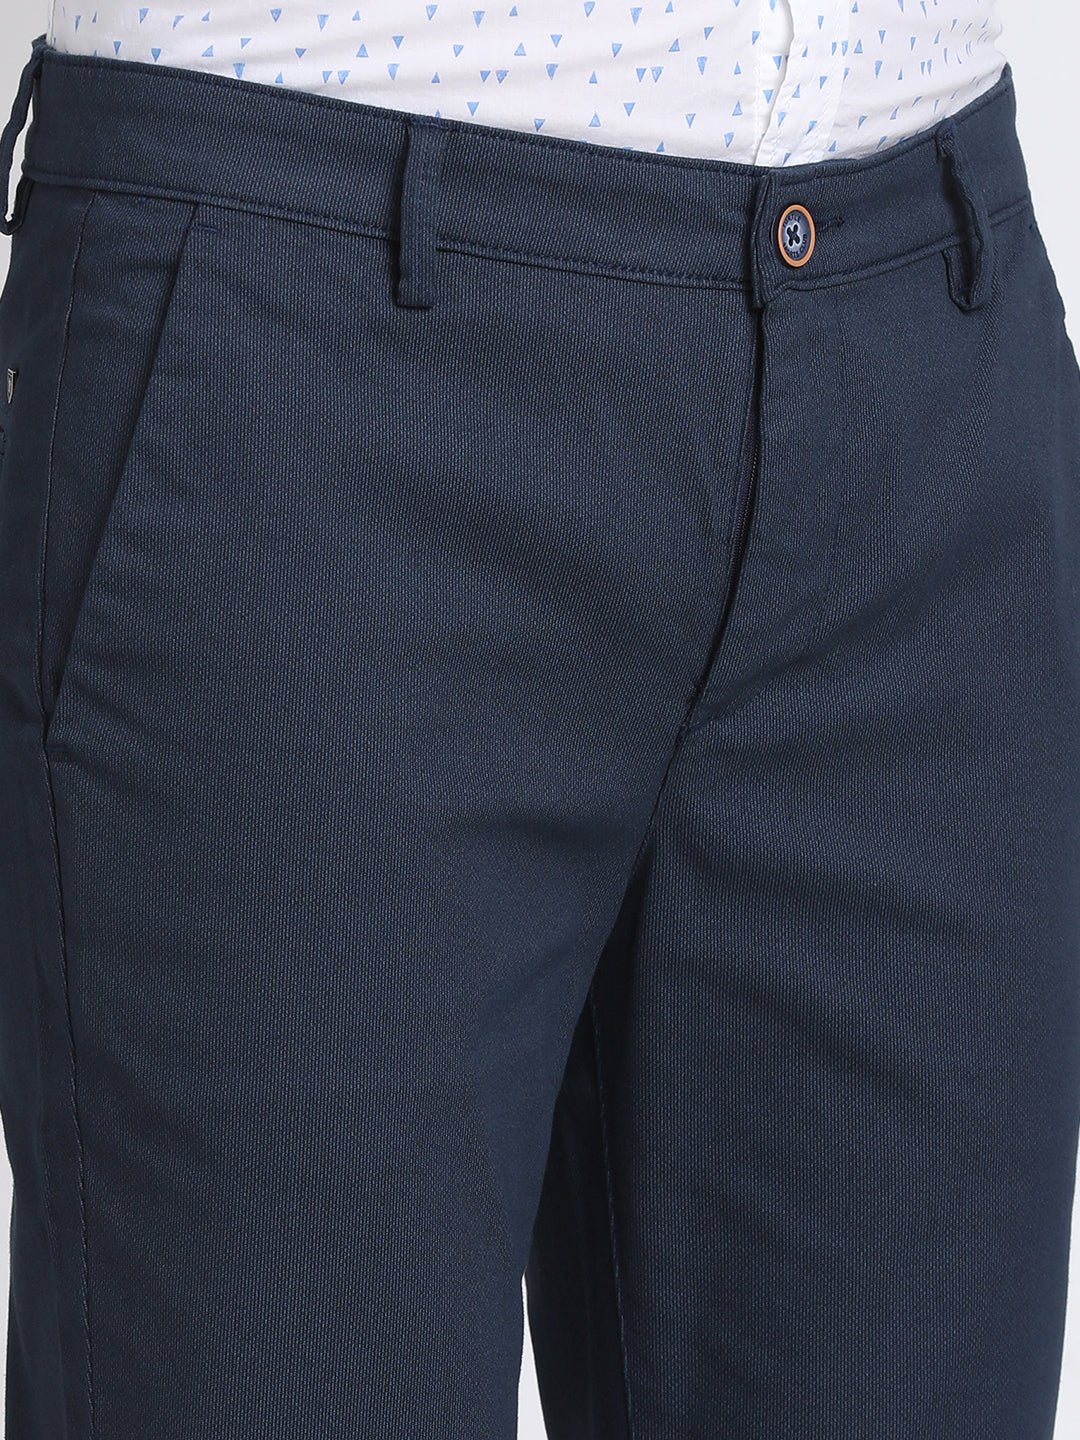 Cotton Stretch Navy Dobby Ultra Slim Fit Flat Front Casual Trouser